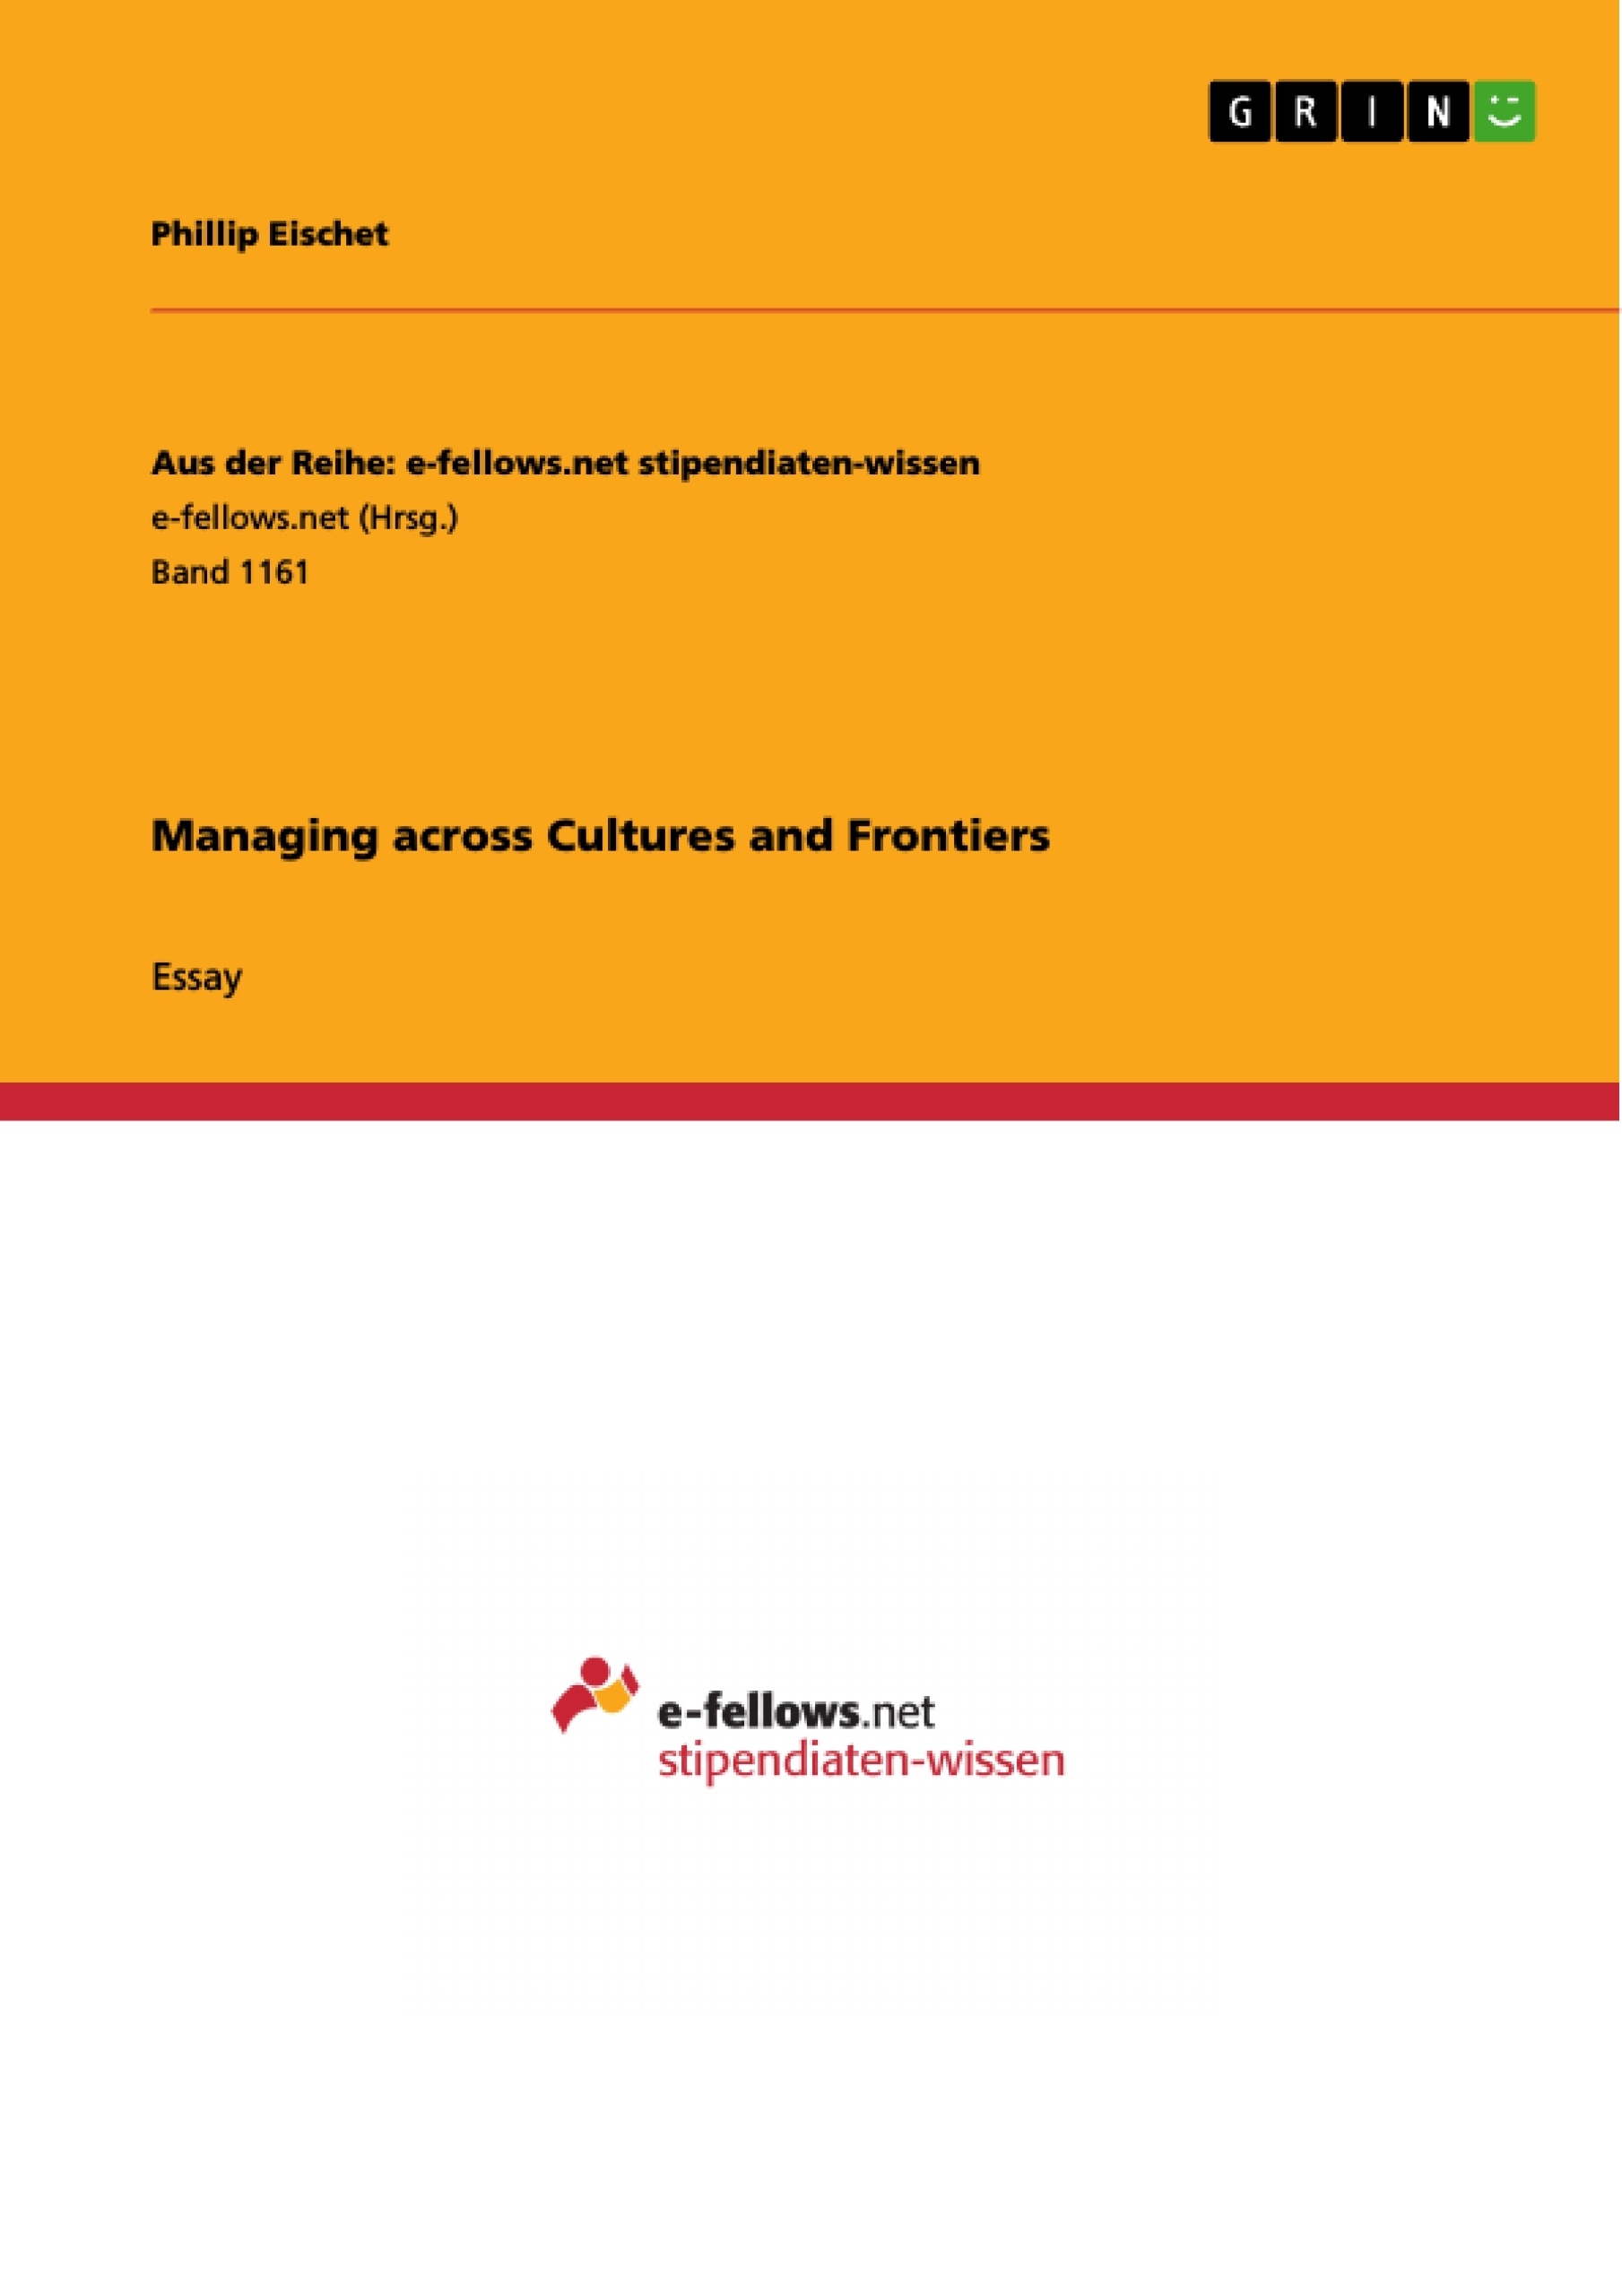 Title: Managing across Cultures and Frontiers